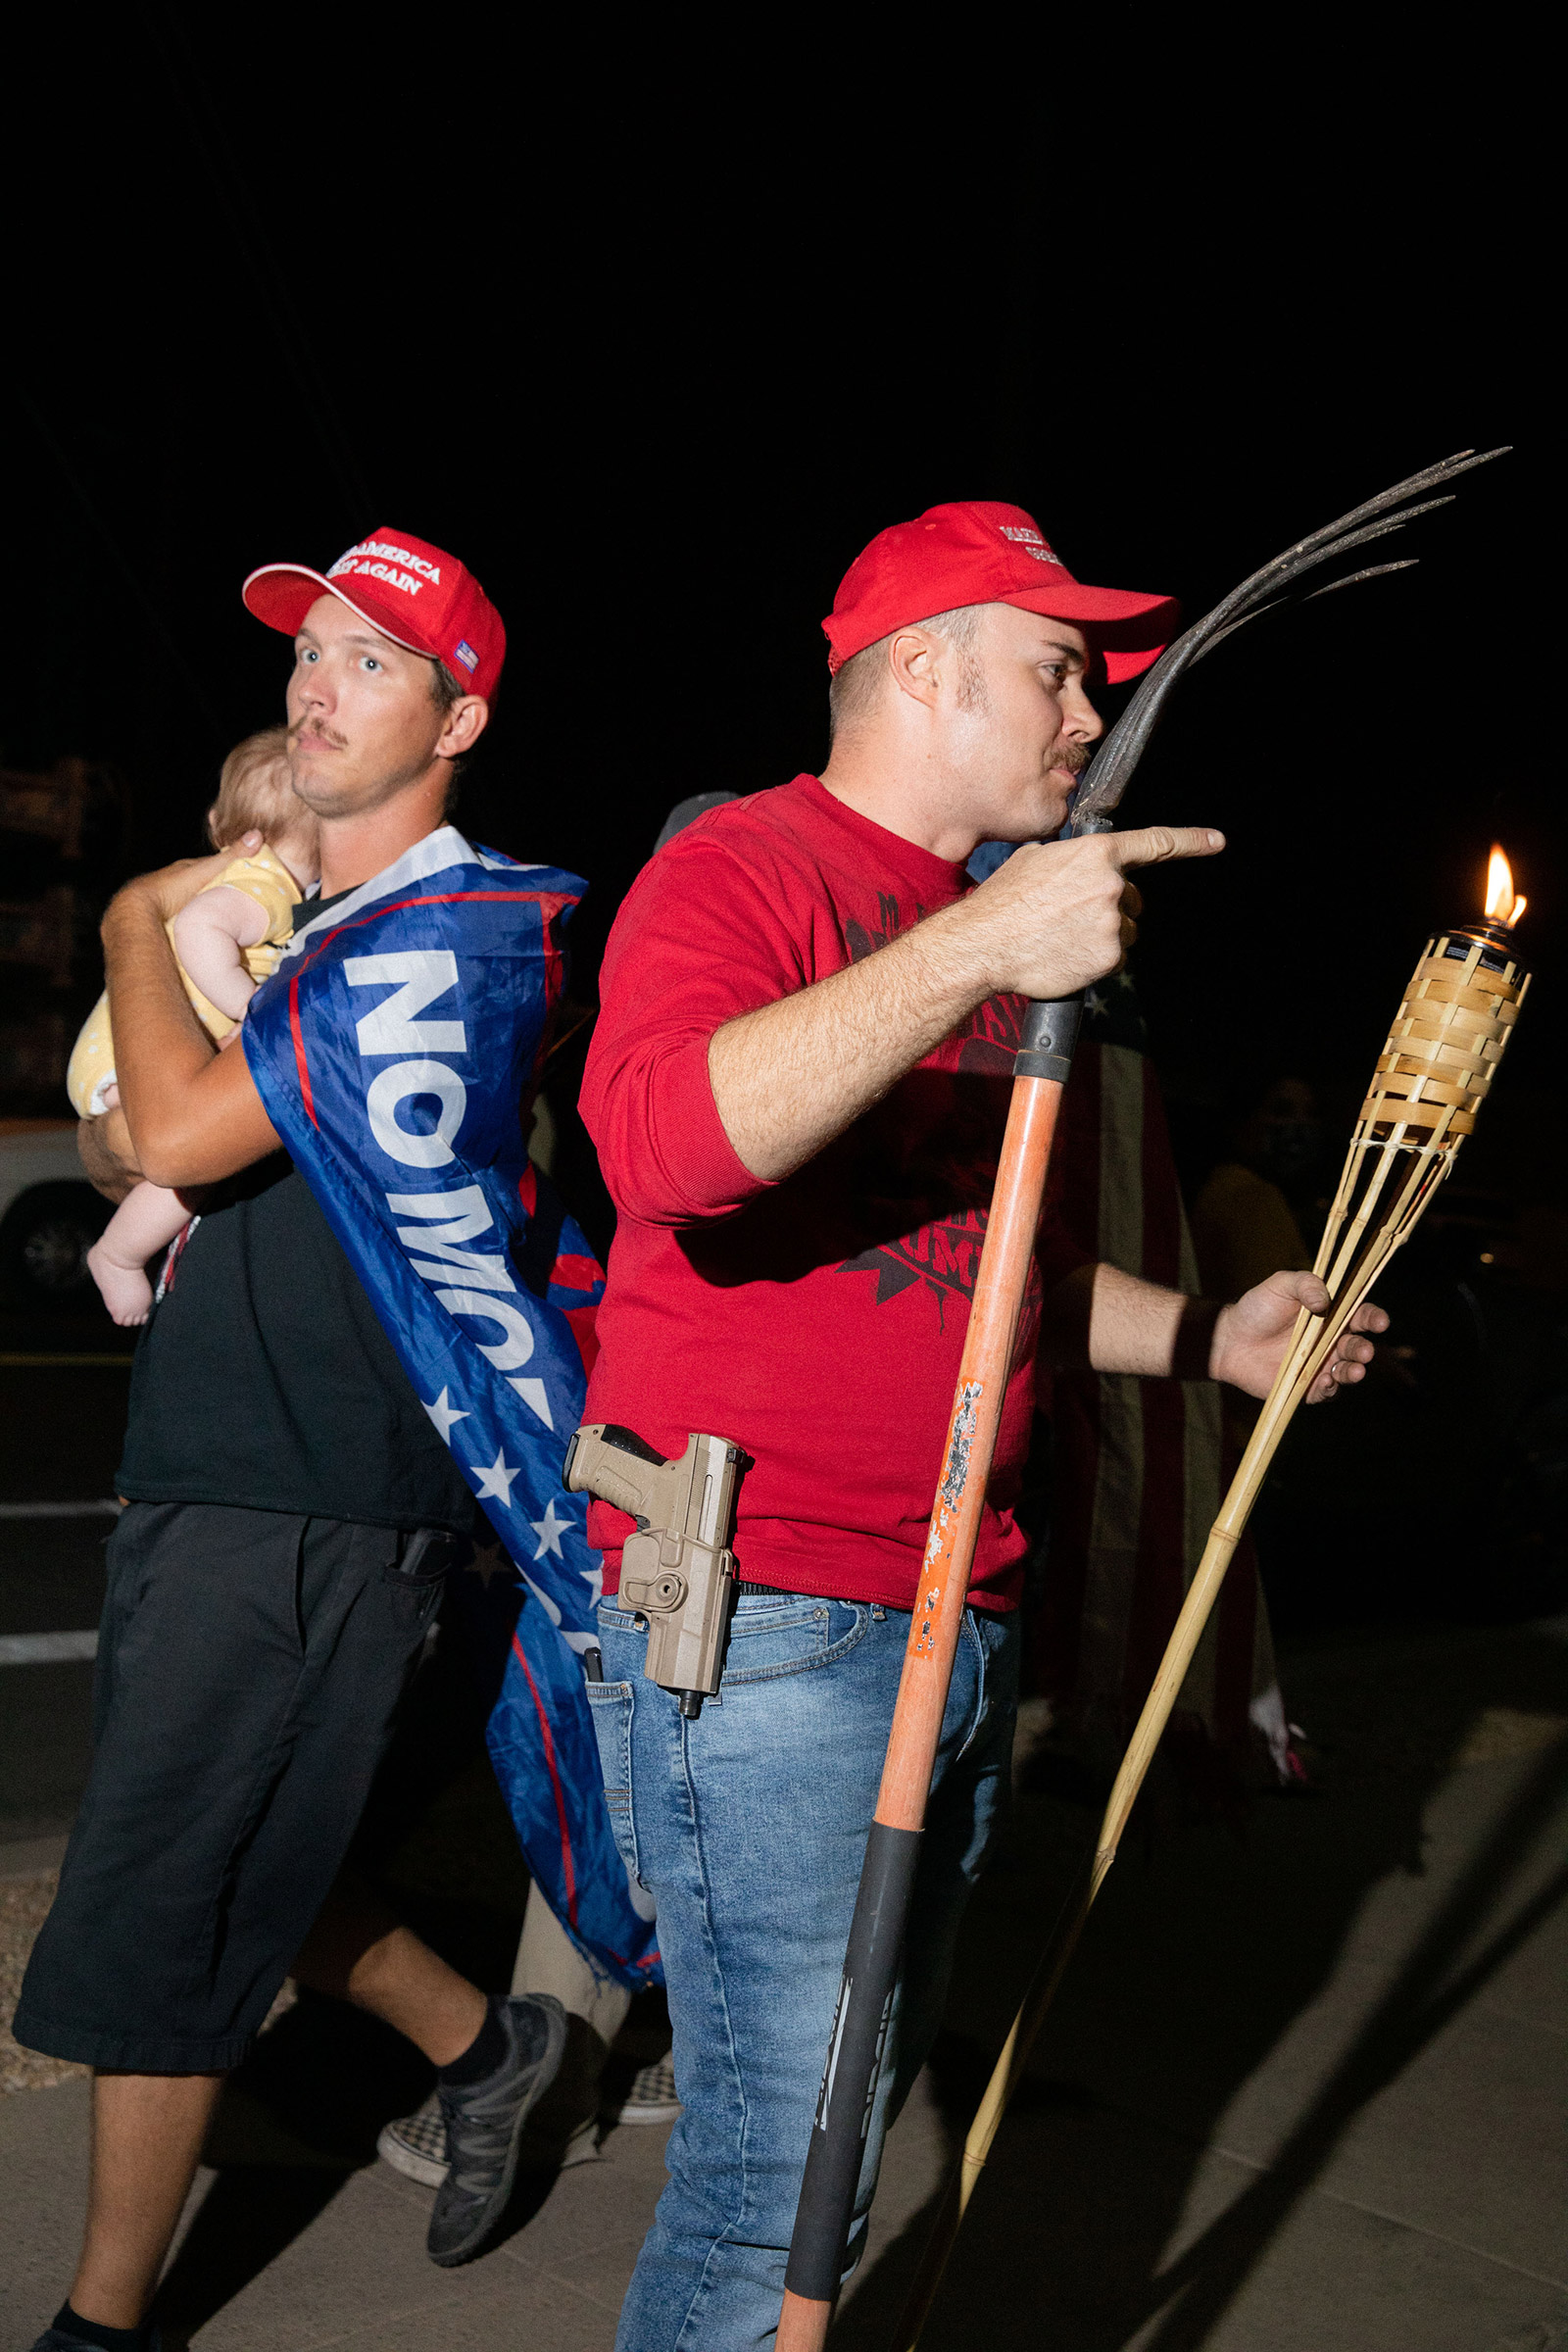 A father with child walks by a man with a rake, gun and tiki torch at the Maricopa County Elections office in Phoenix, on Nov. 5, 2020.